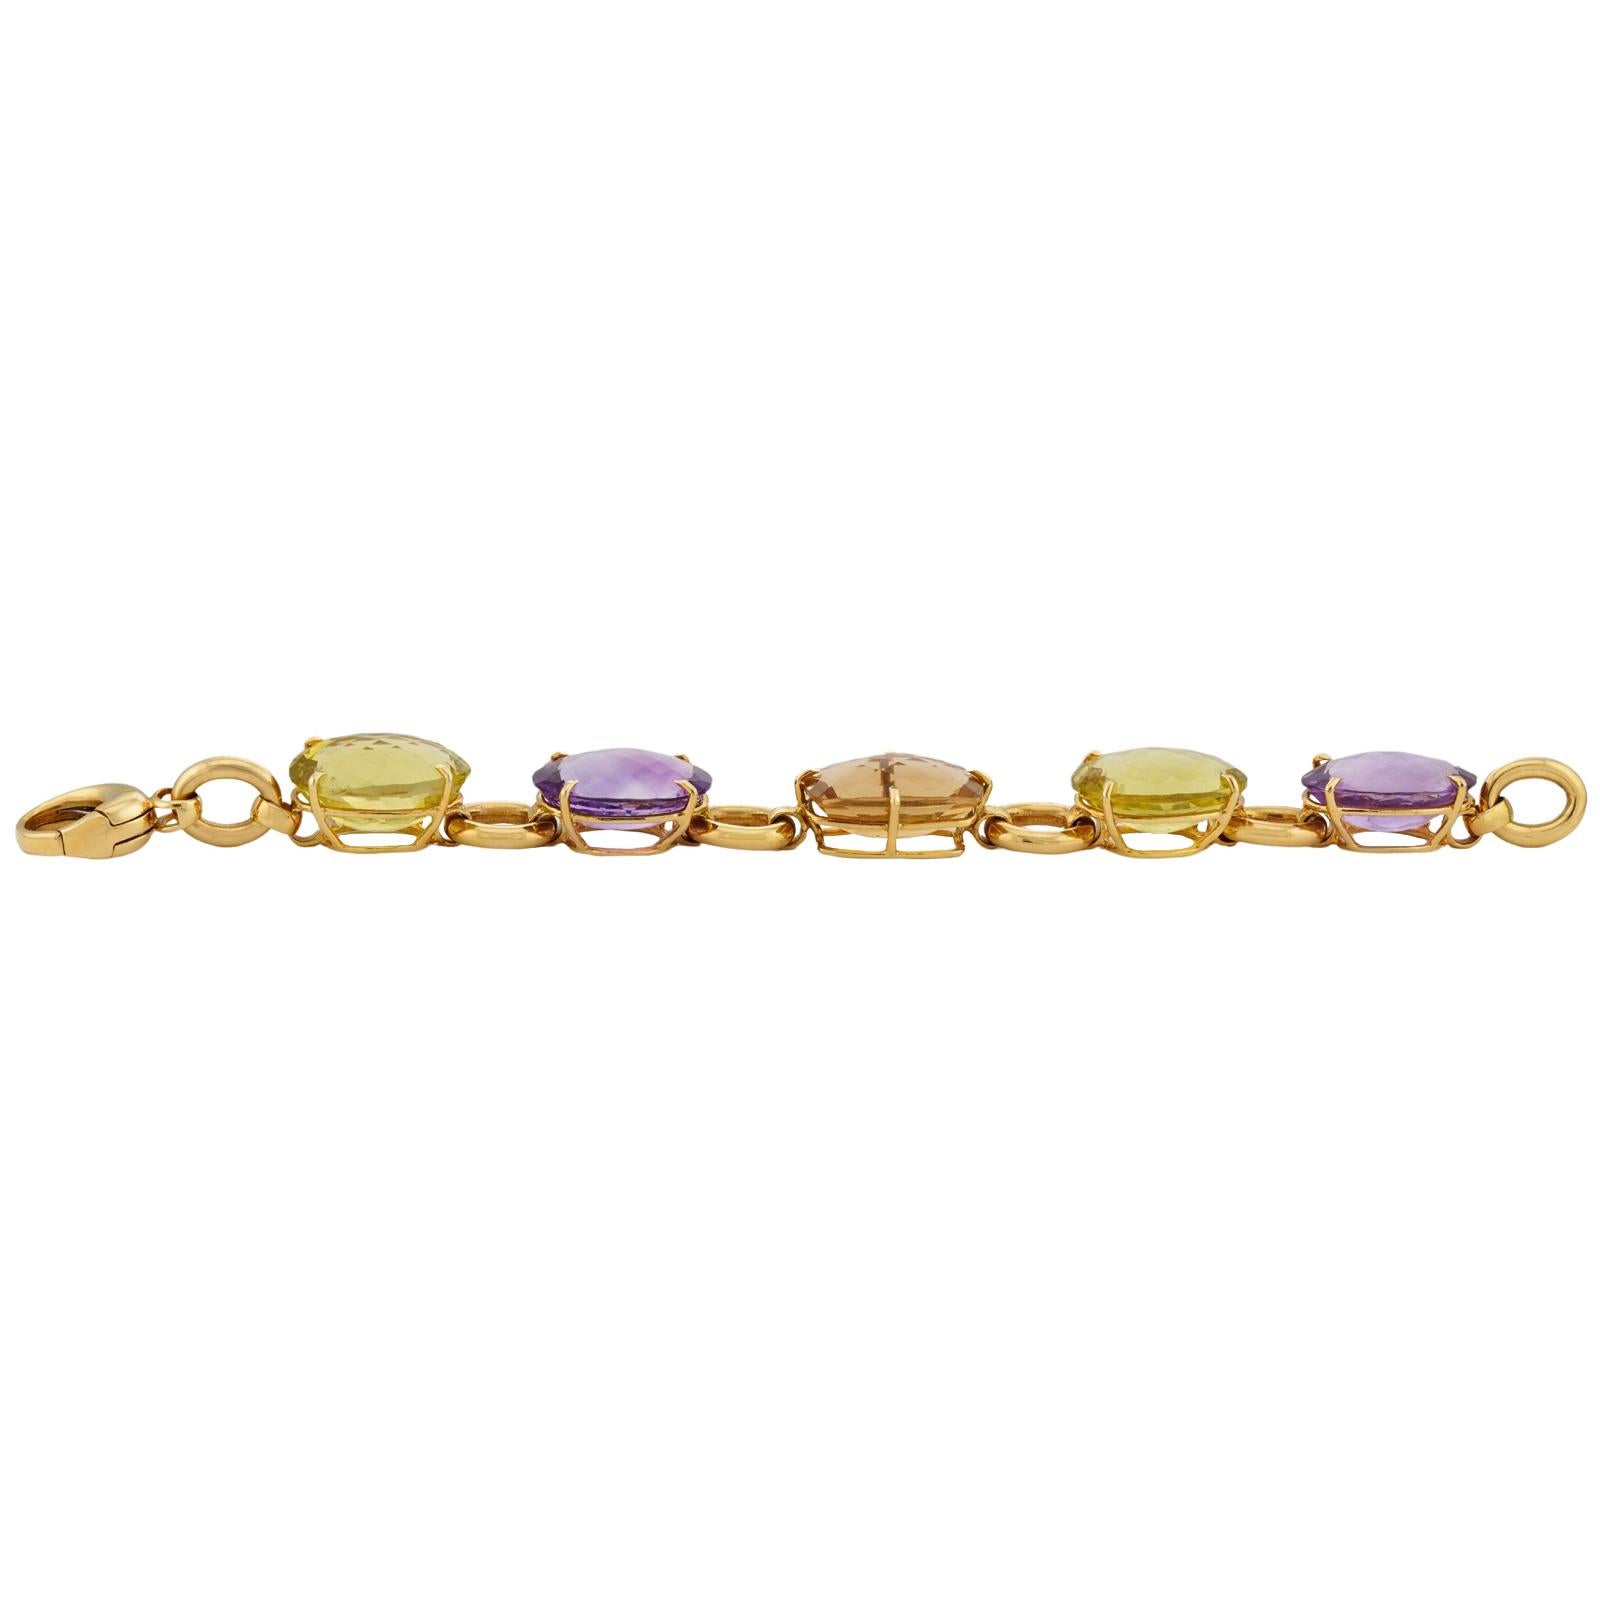 ROBERTO COIN 18k Yellow Gold Multicolor Gemstone Bracelet In Excellent Condition For Sale In New York, NY